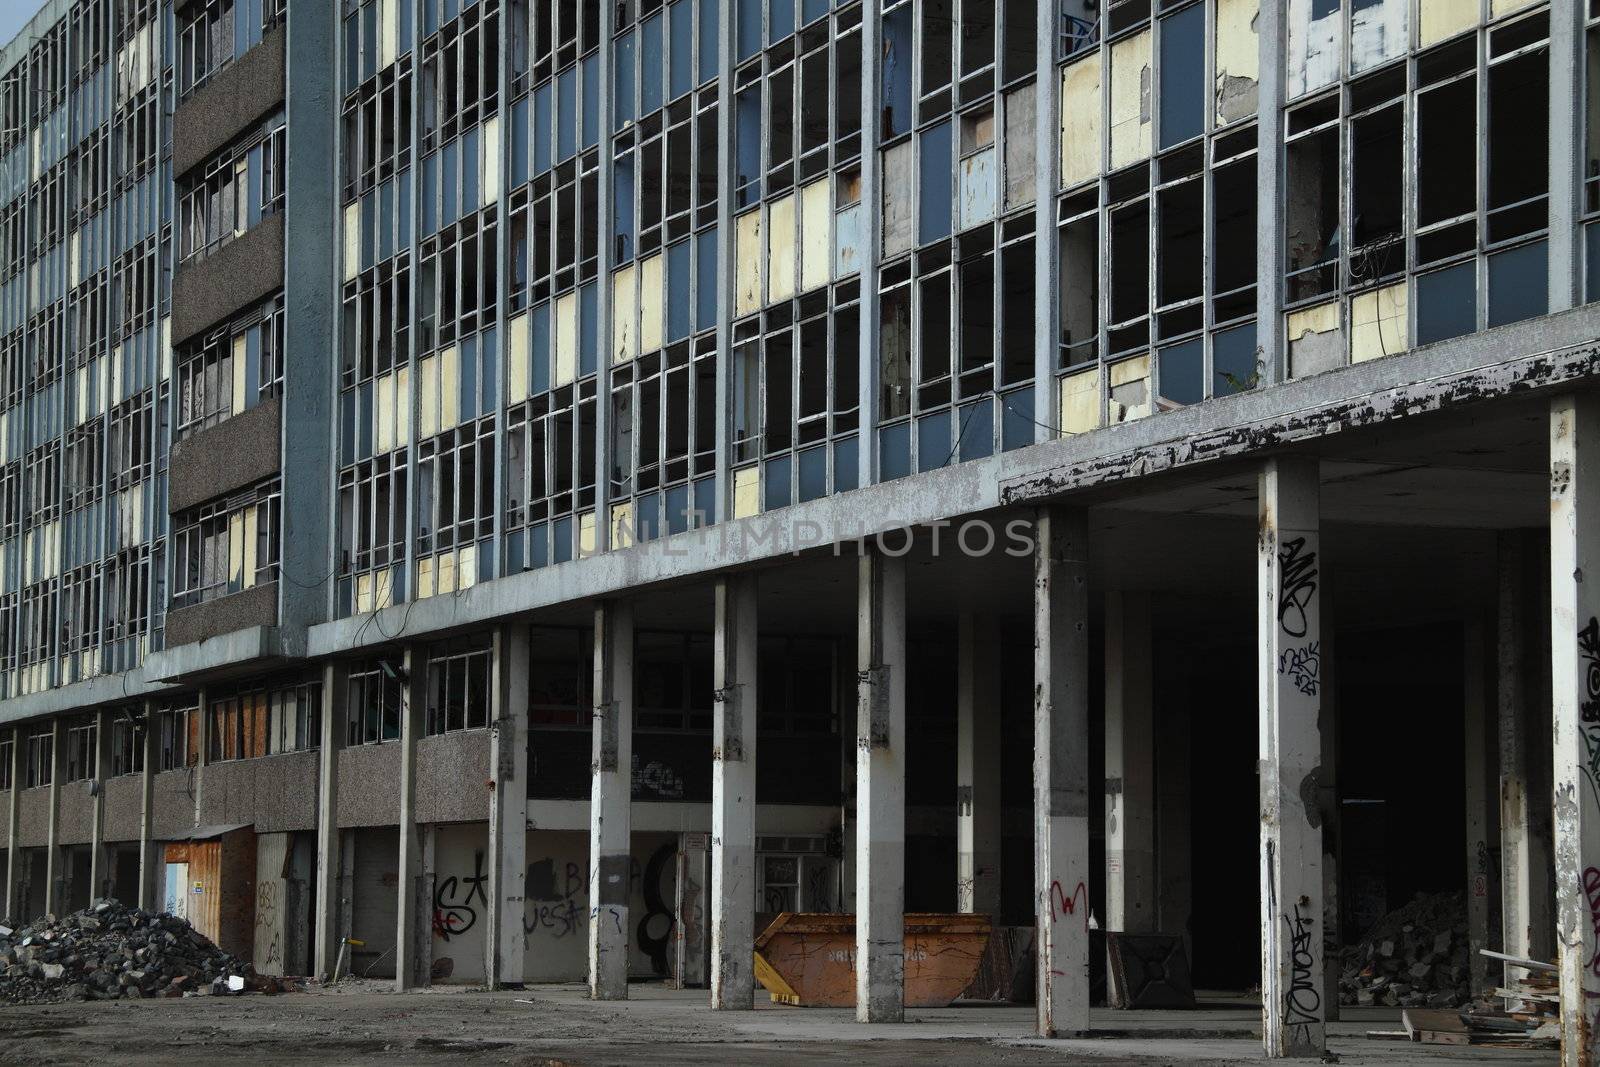 Abandoned premises in downtown Bristol by pjhpix